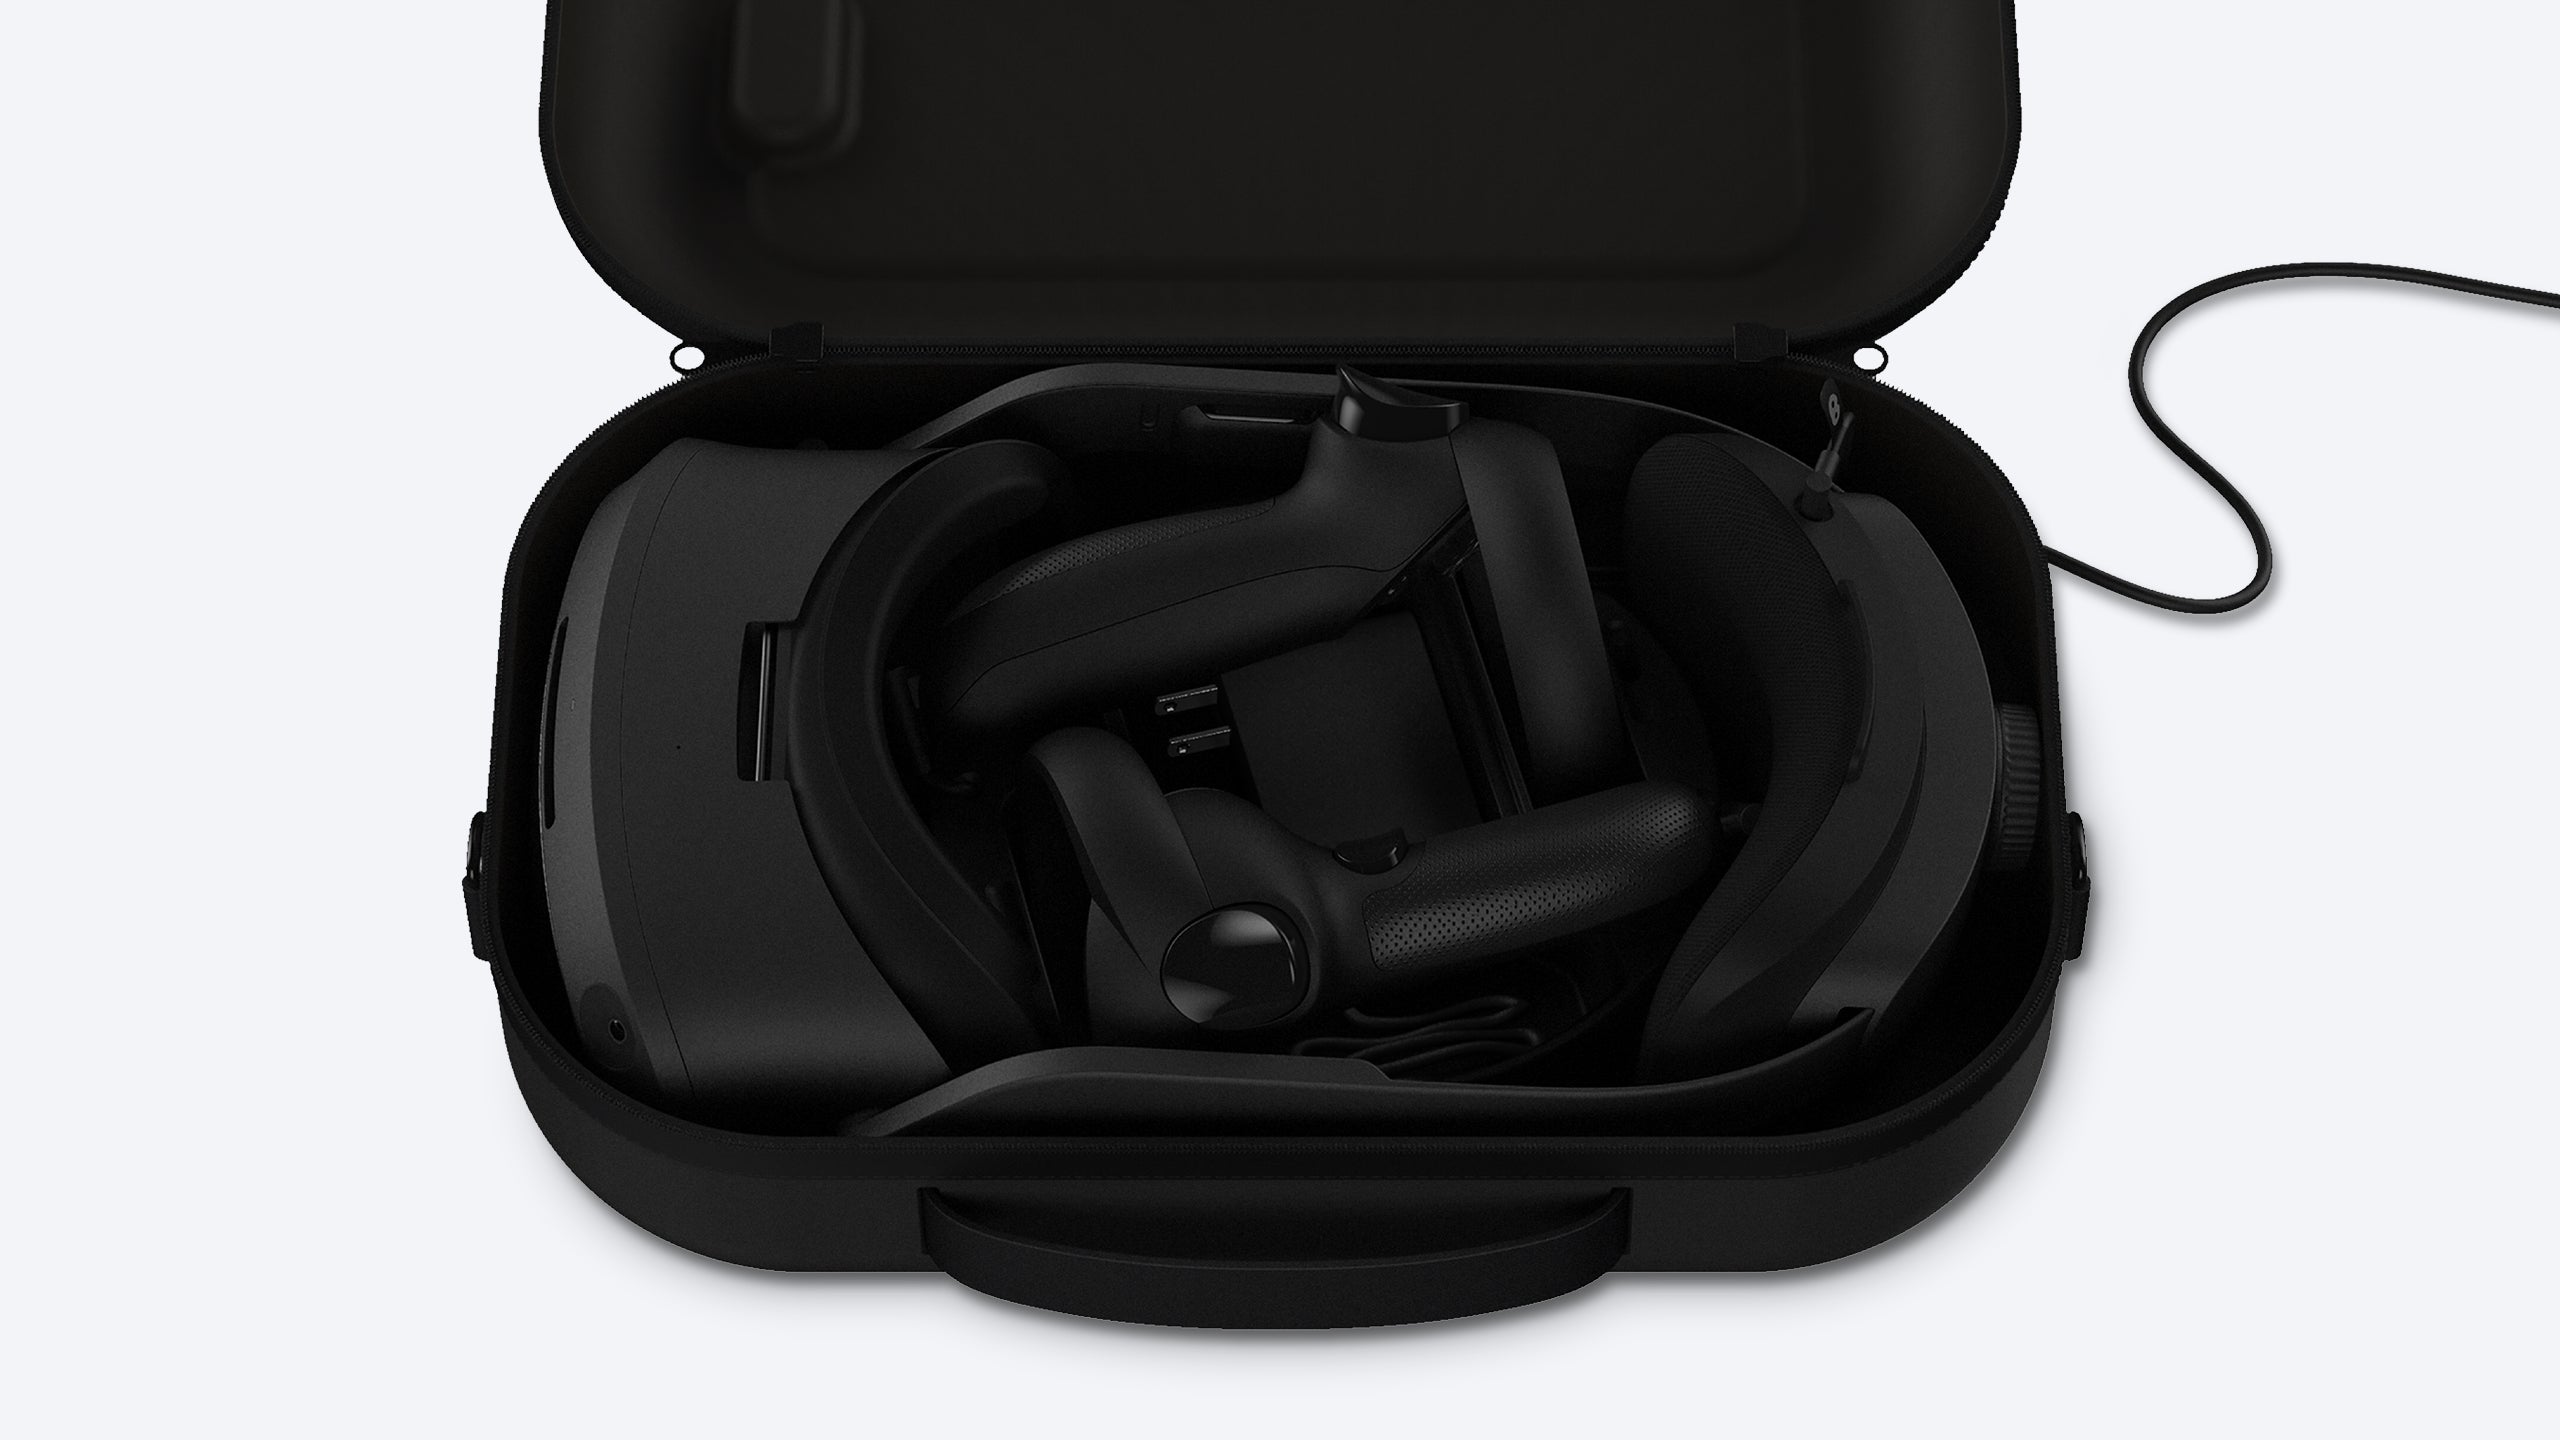 The Vive Focus 3 Carrying Case charges and automatically pairs a headset and controllers. (Photo: HTC)